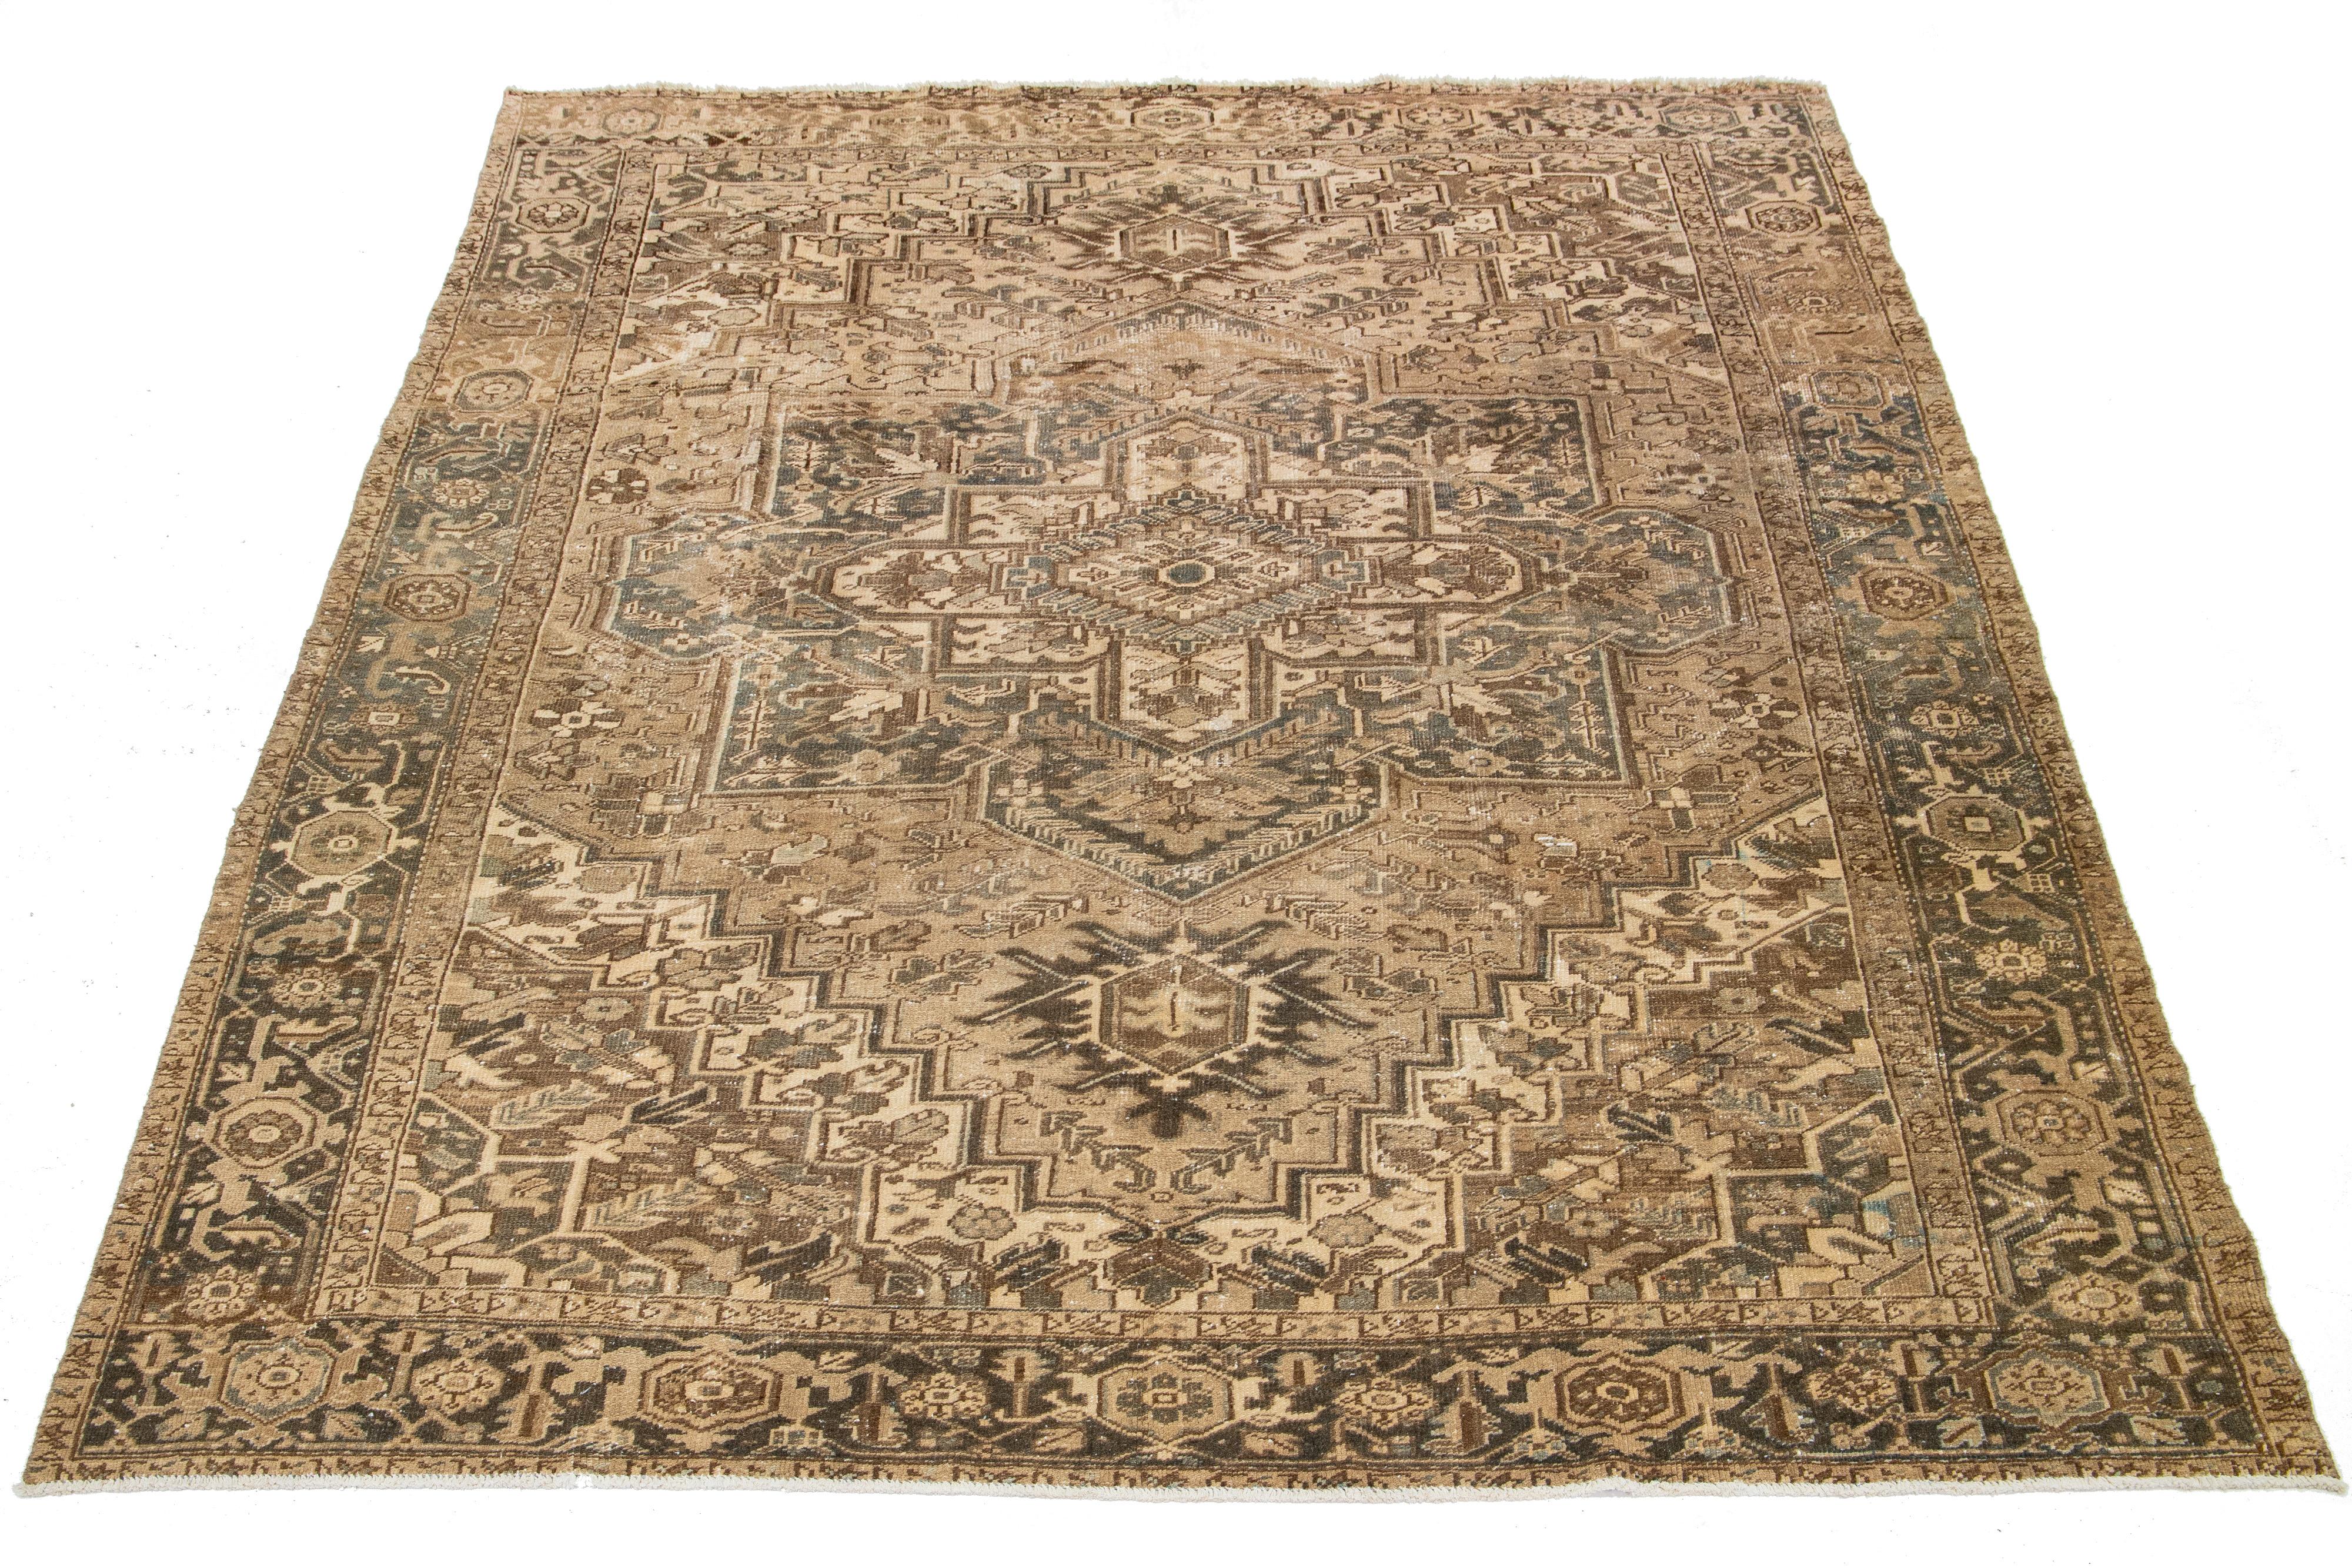 This Persian Heriz rug is handcrafted with wool that is knotted by hand. The field of the rug is adorned with a captivating design in a brown color, enhanced with beautiful shades of gray and beige.

This rug measures 9' x 11'8